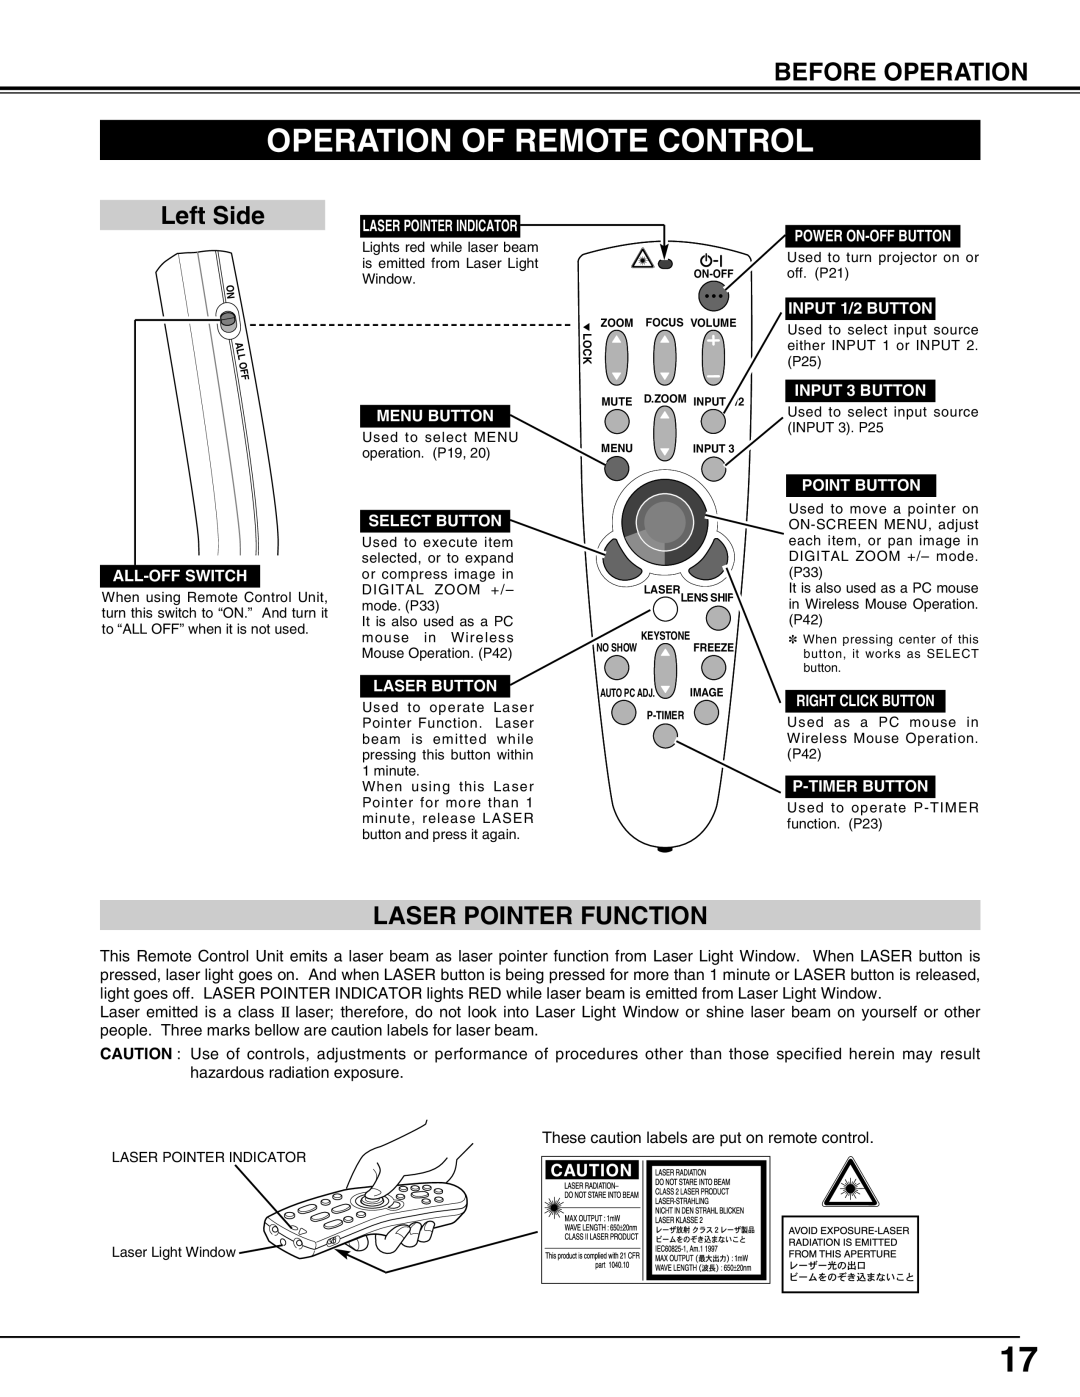 Eiki LC-SX4LA instruction manual Operation Of Remote Control, Left Side, Laser Pointer Function, Before Operation 